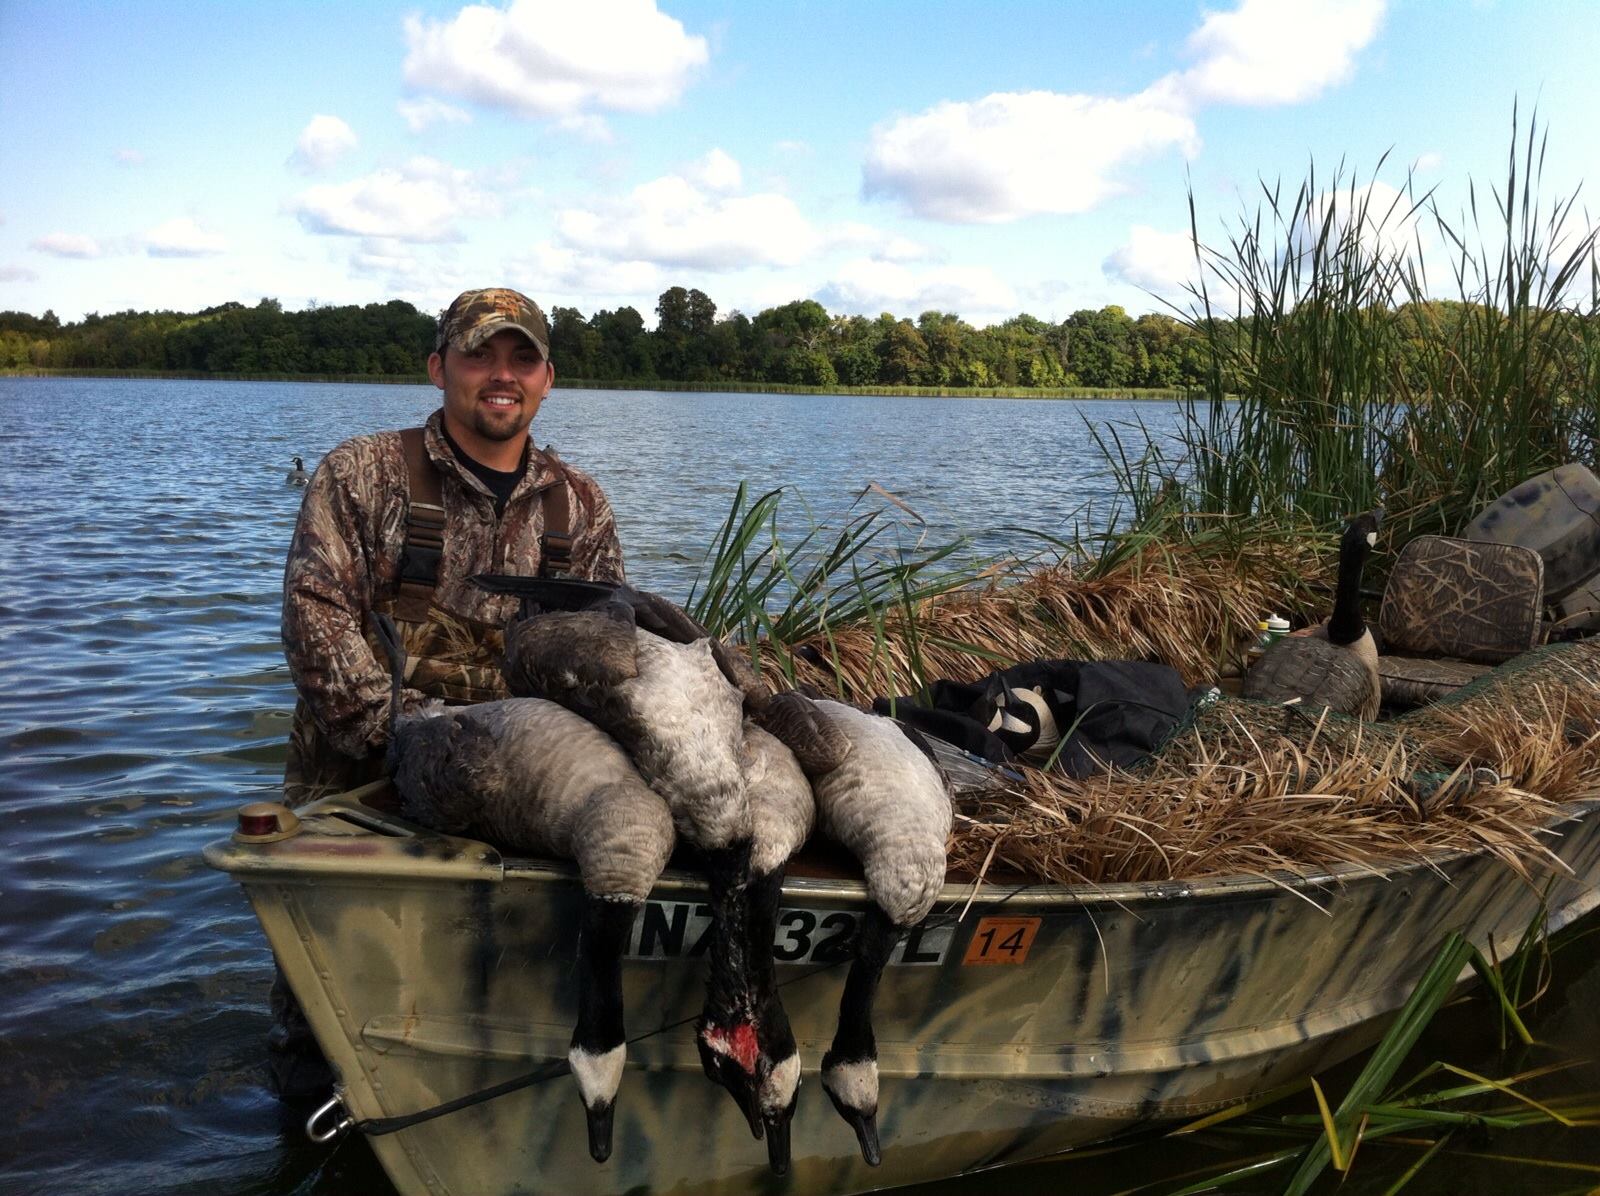 Trevor with some geese on his boat blind